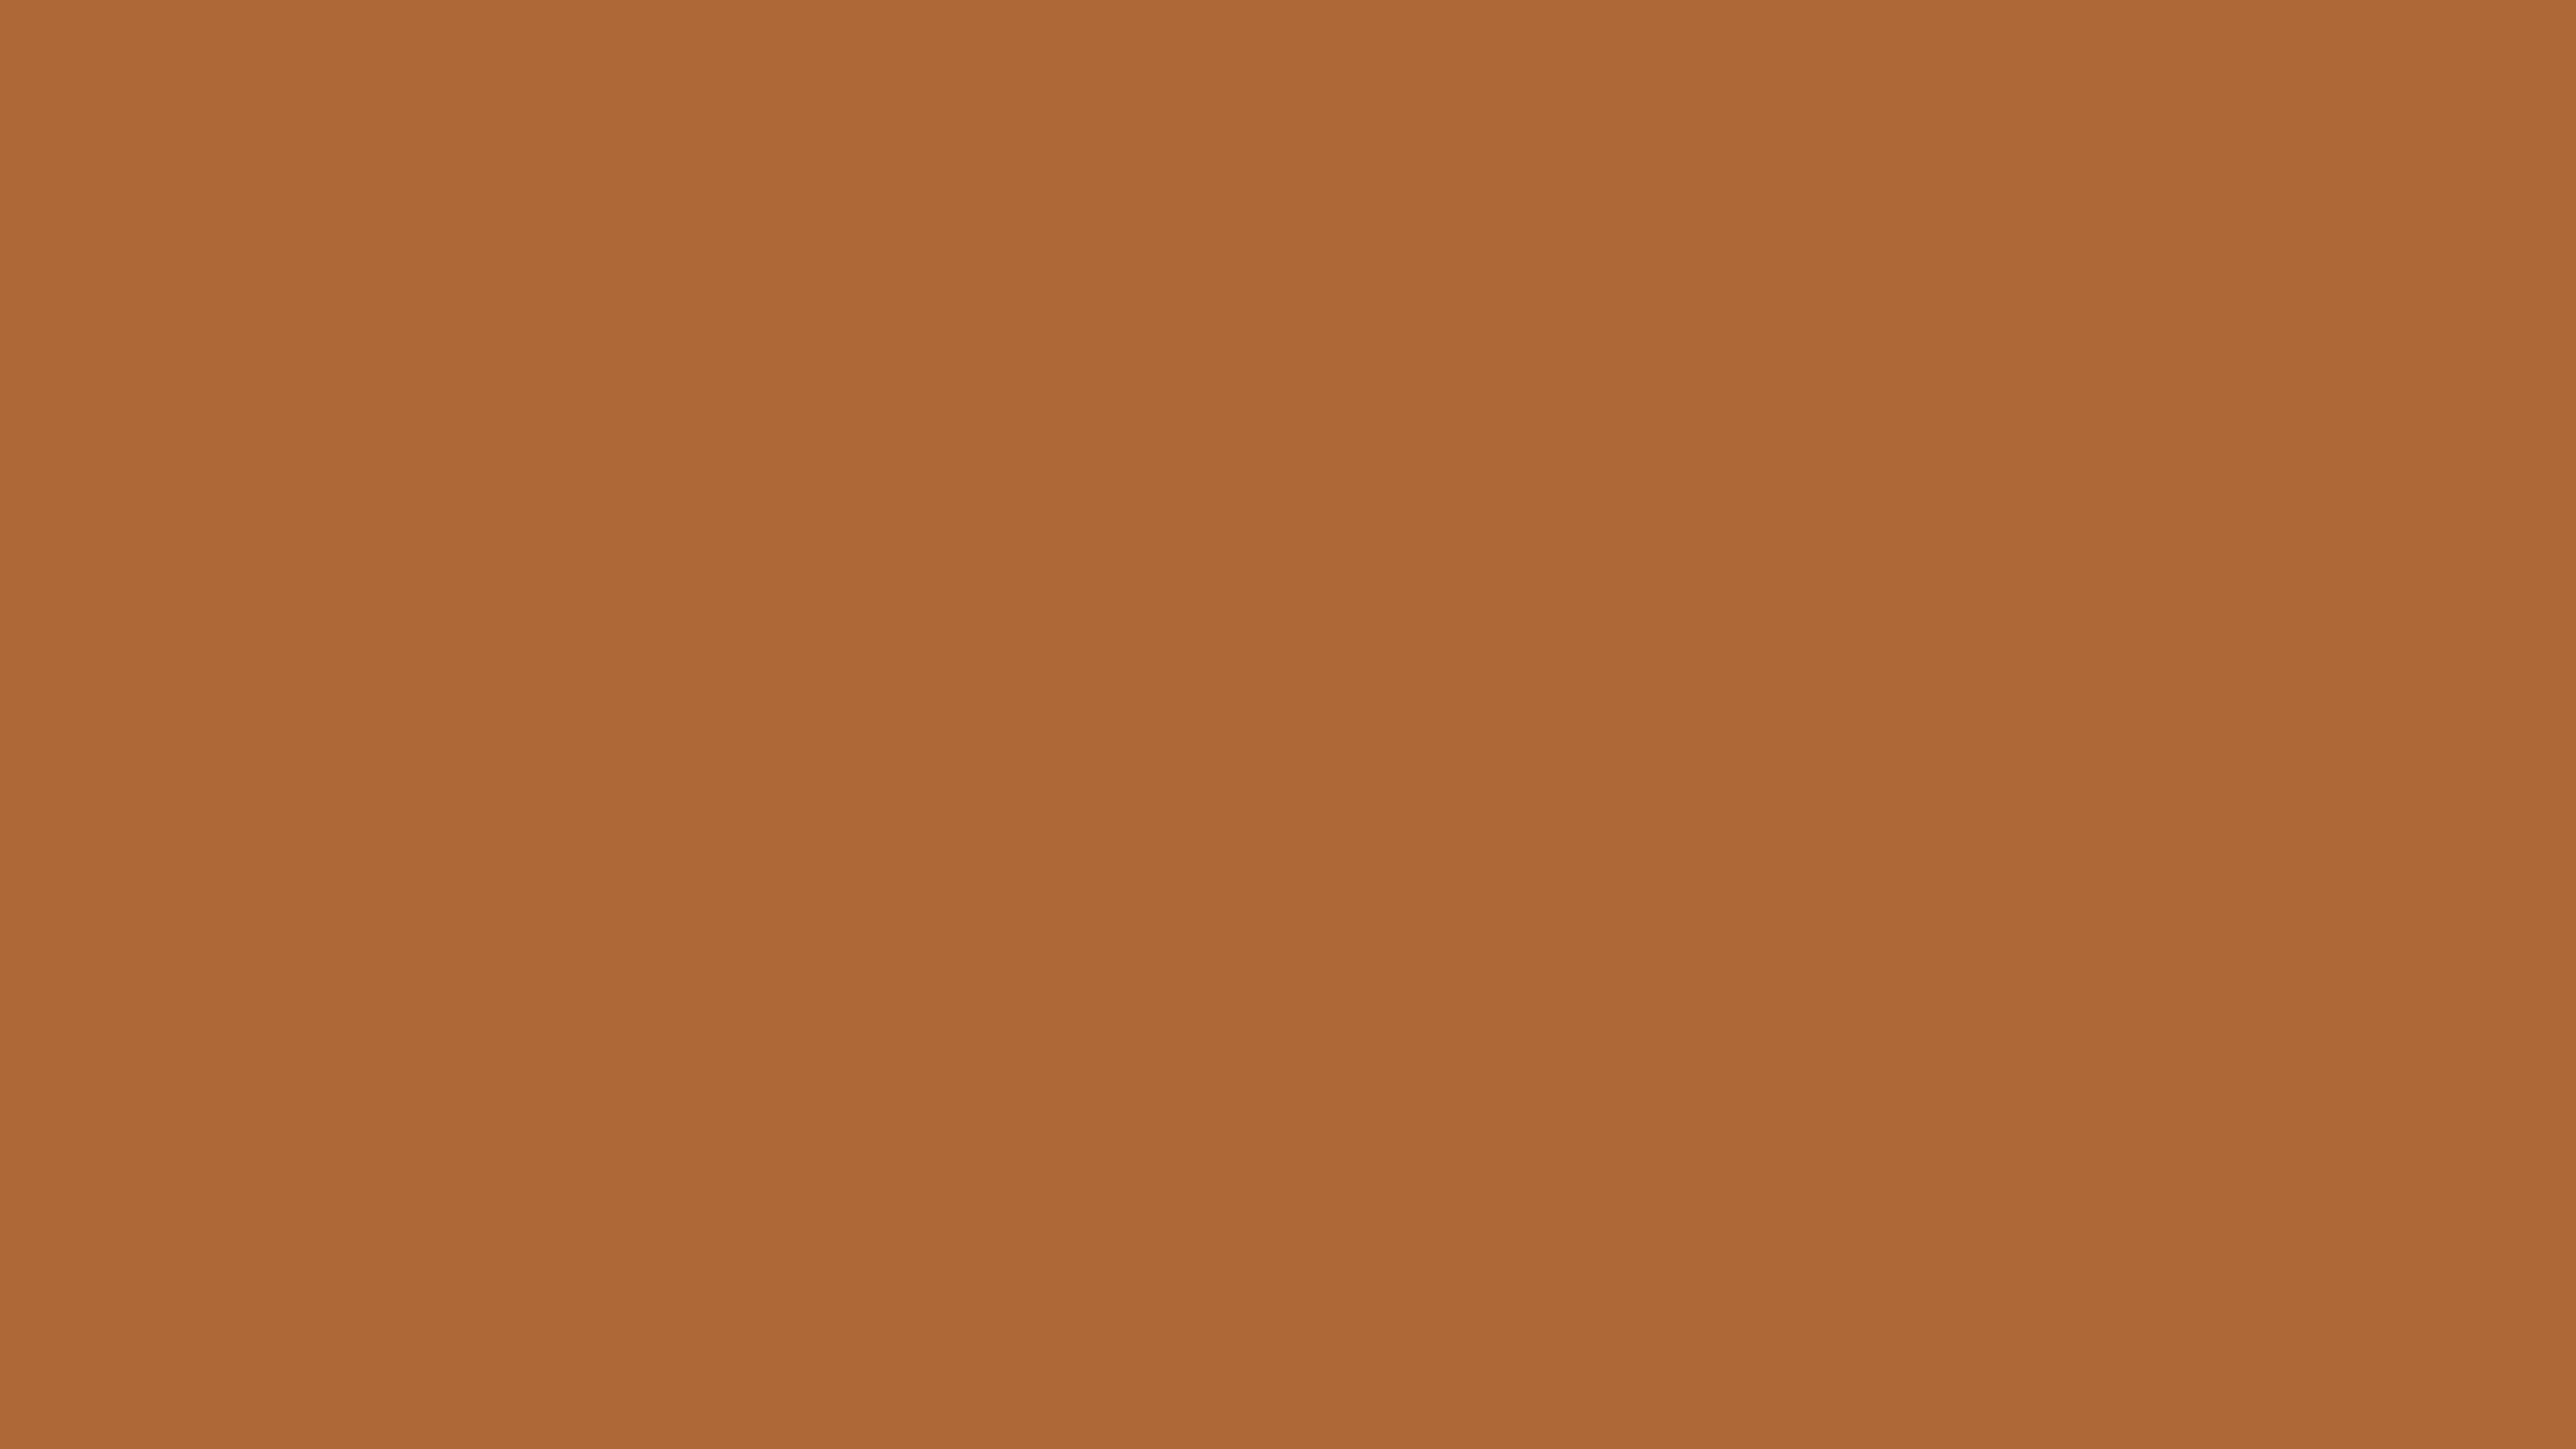 Tuscan Tan Solid Color Background Wallpaper 5120x2880